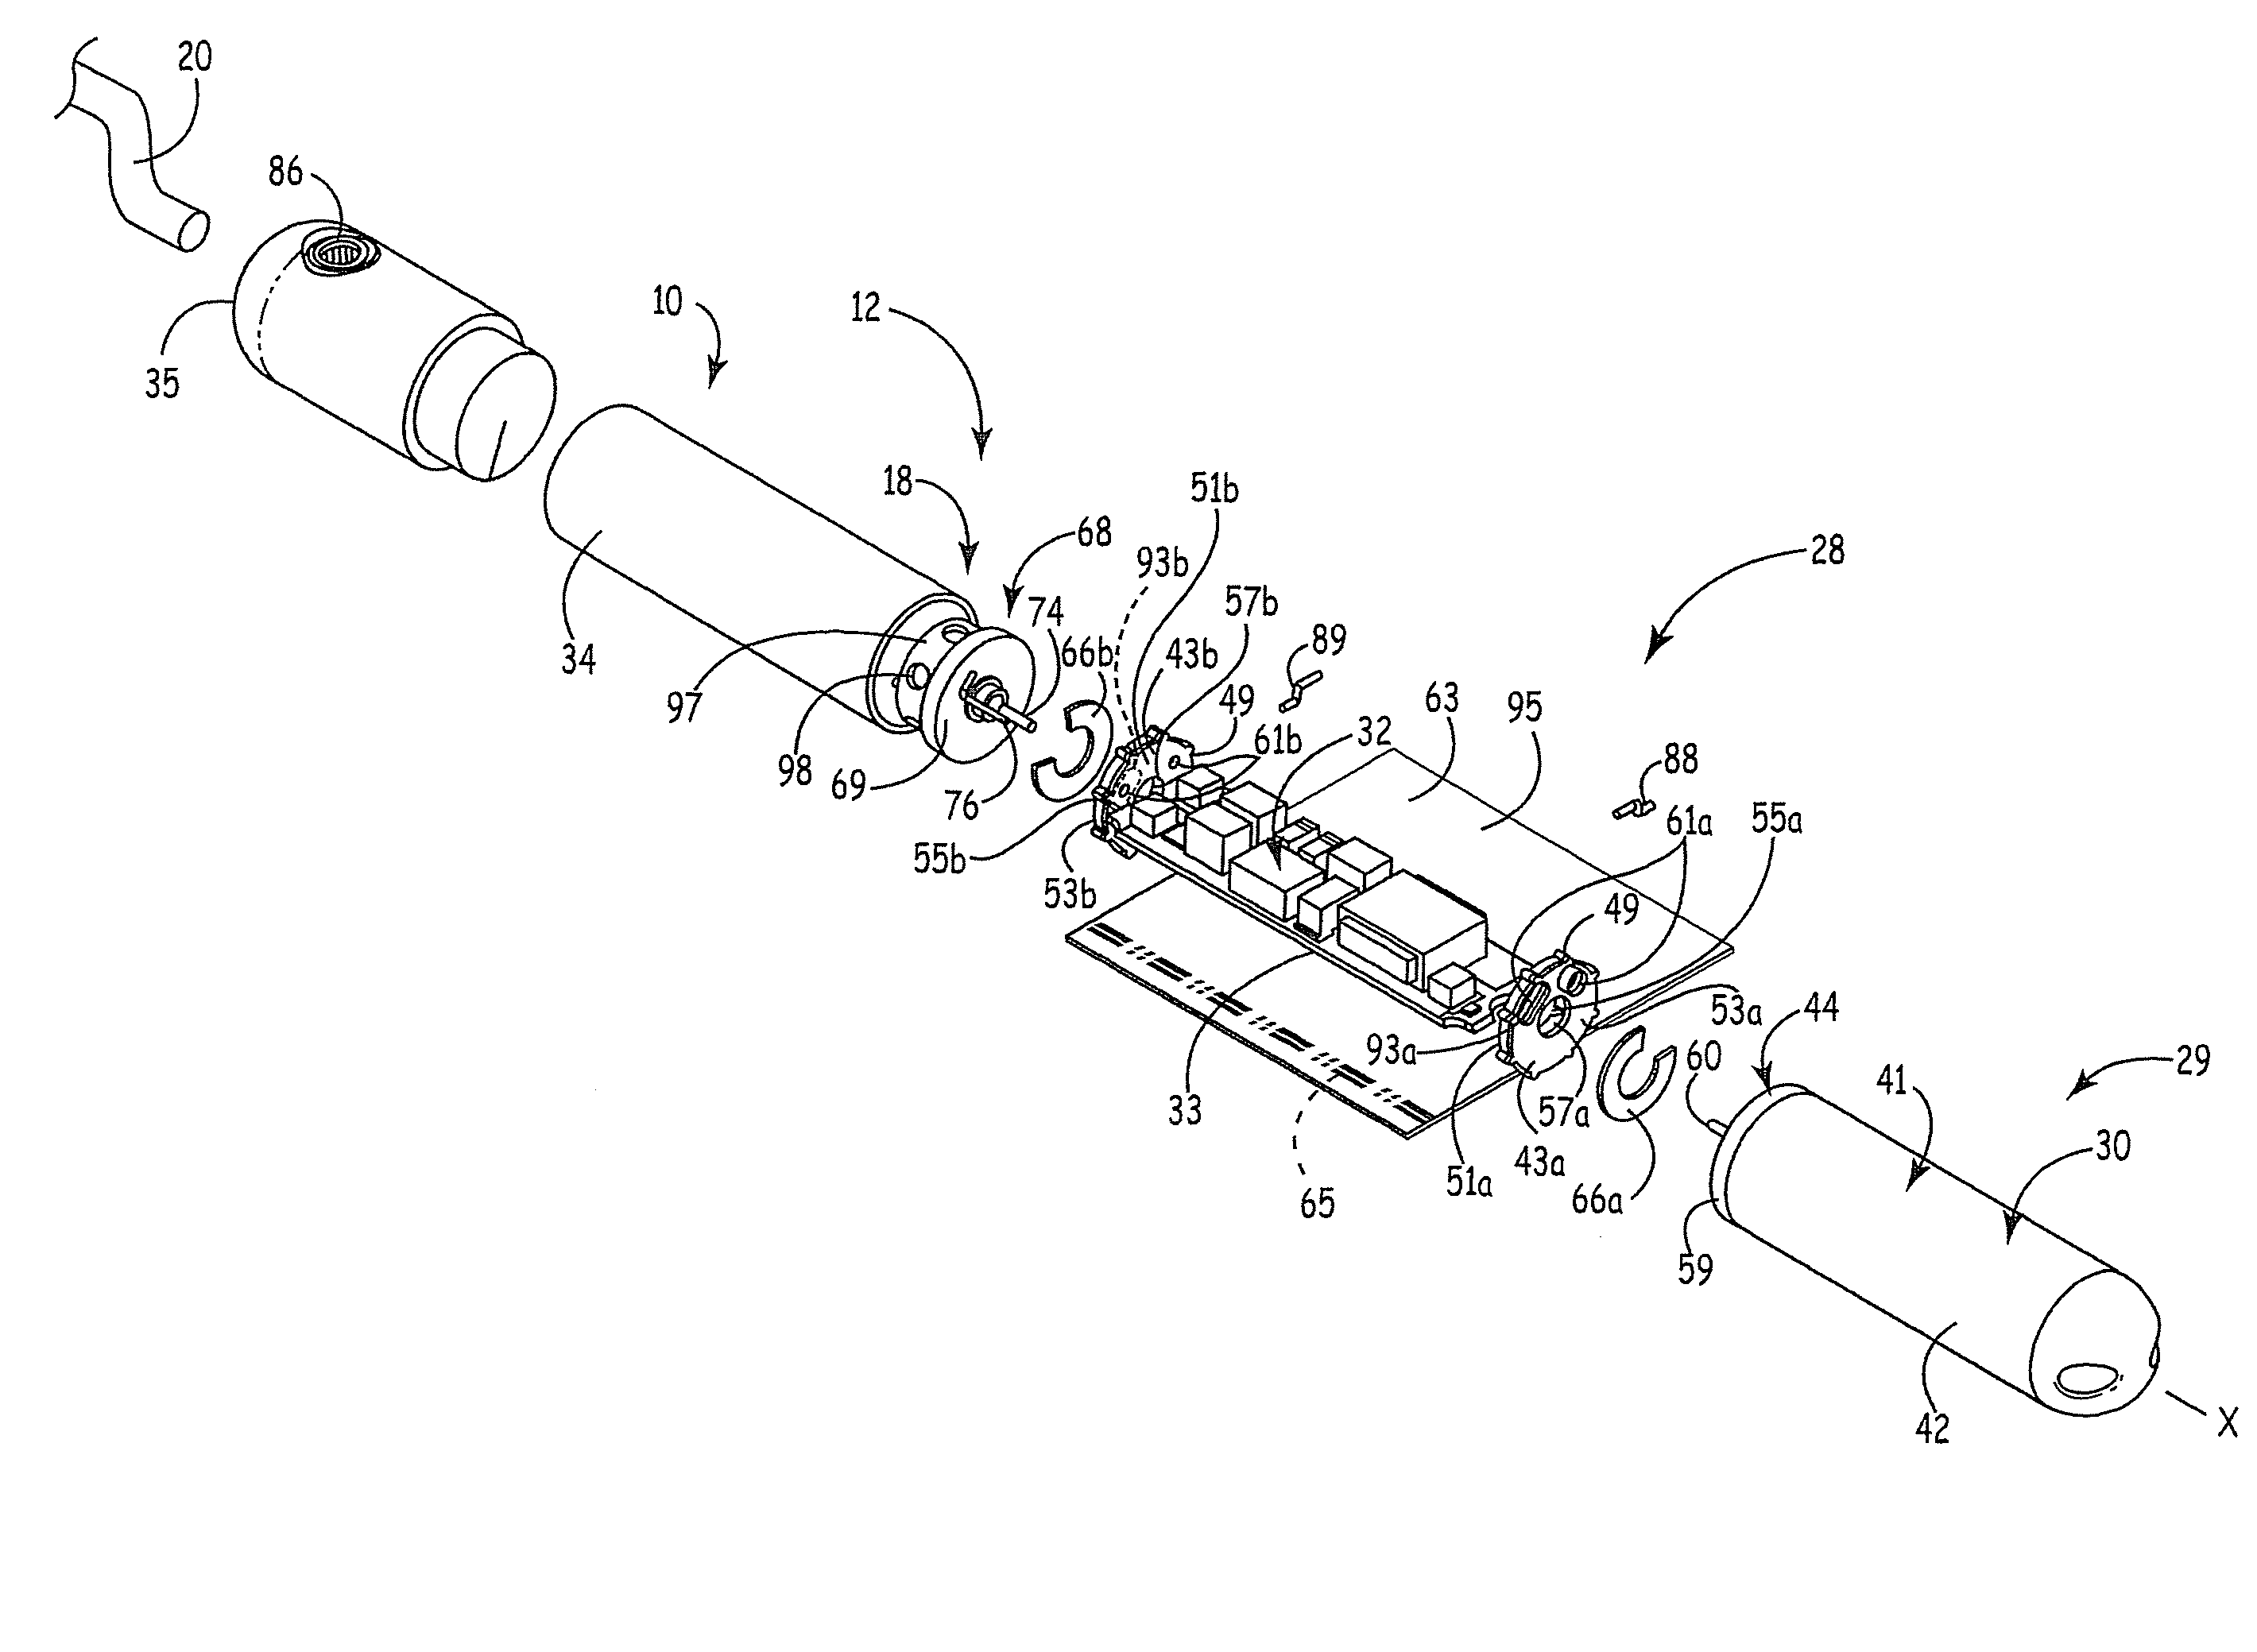 Implantable medical device with exposed generator